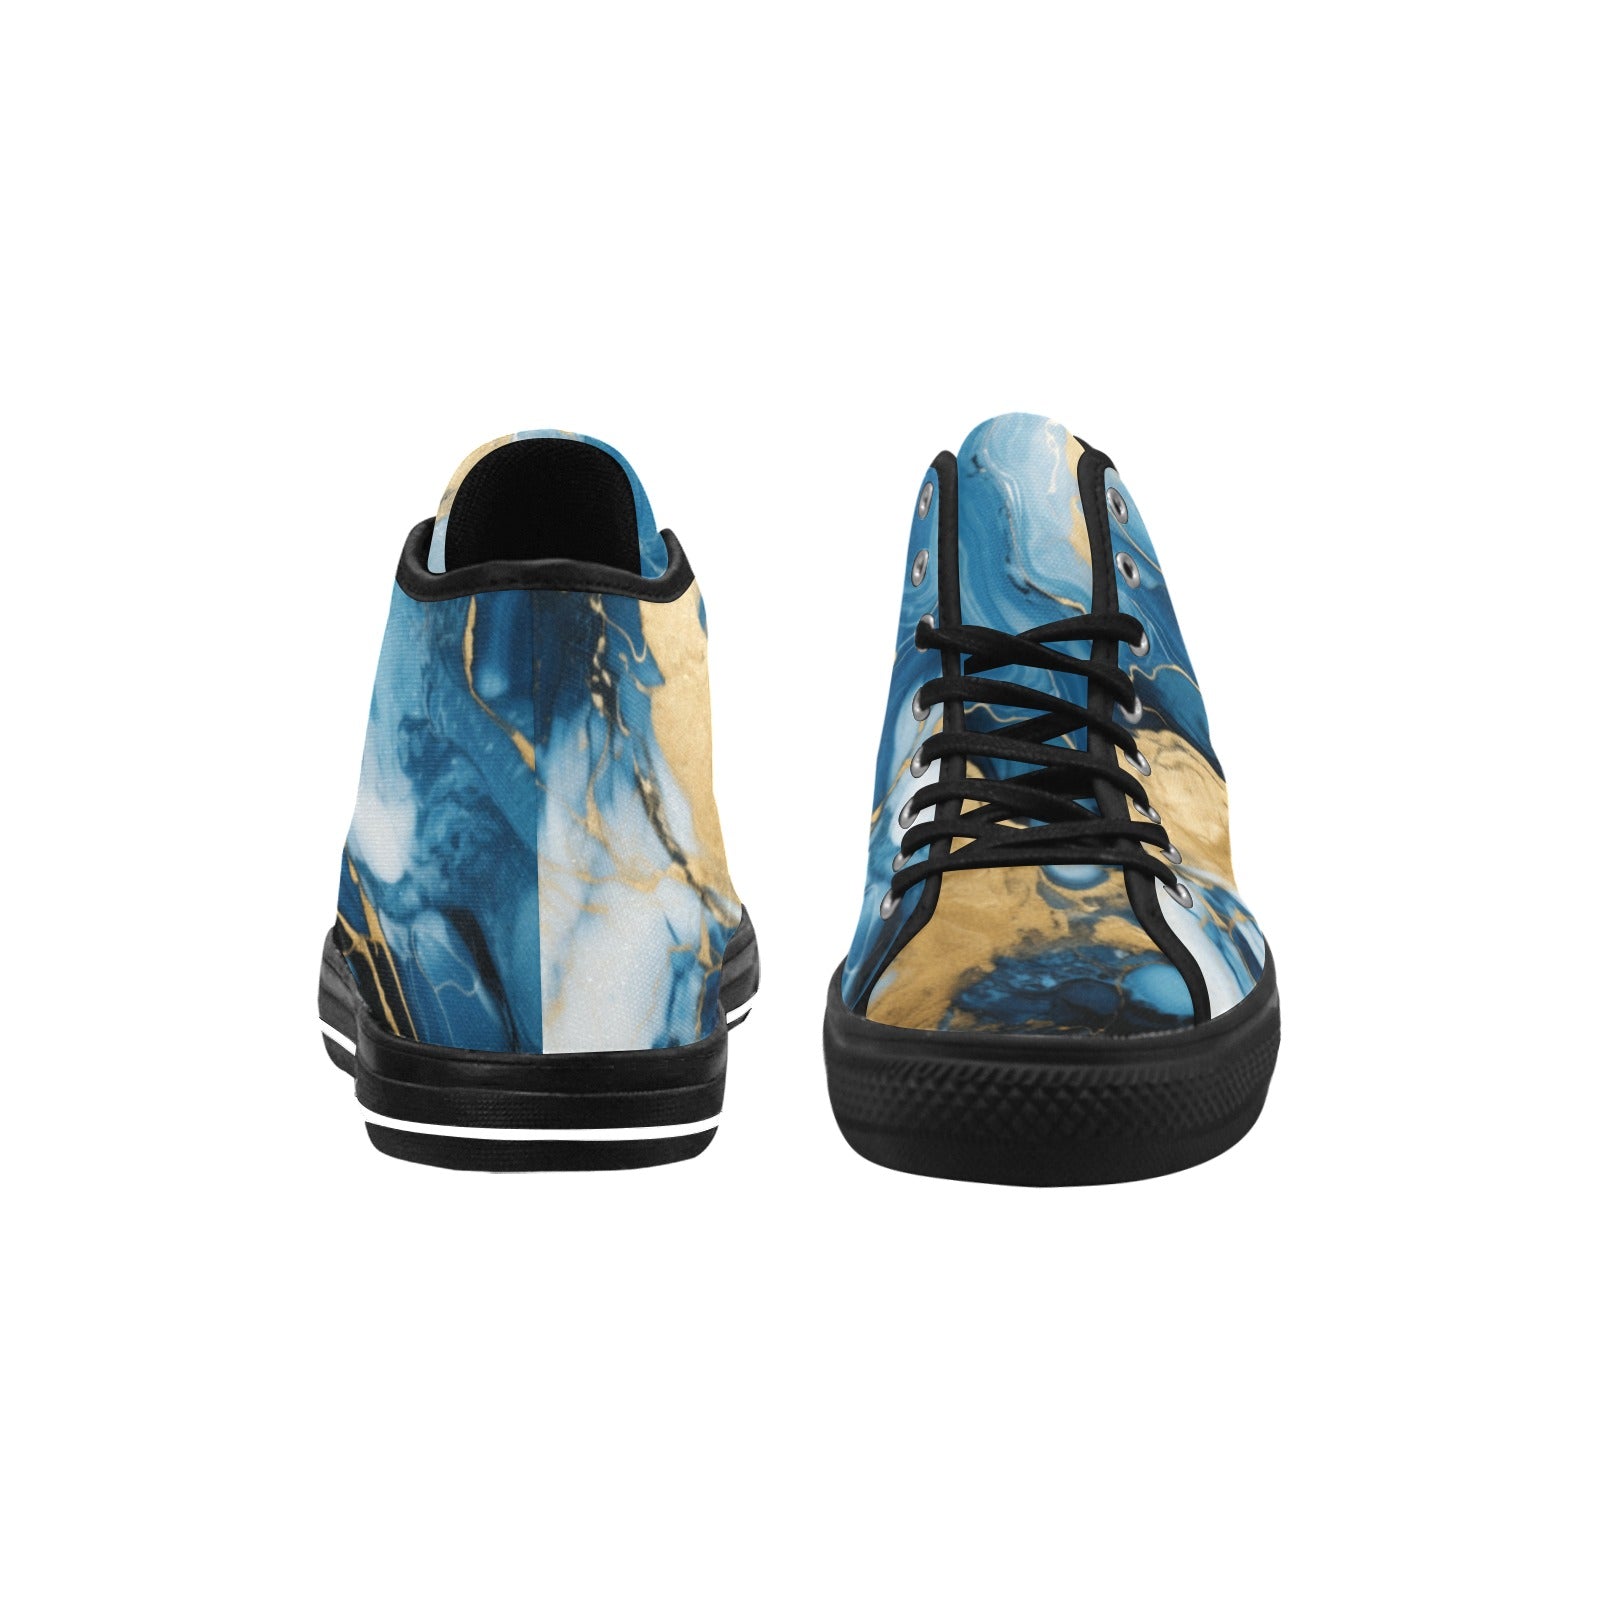 Blue & Gold Marble Vancouver High Top Canvas Shoes for Women | Cranberry Lake Designs